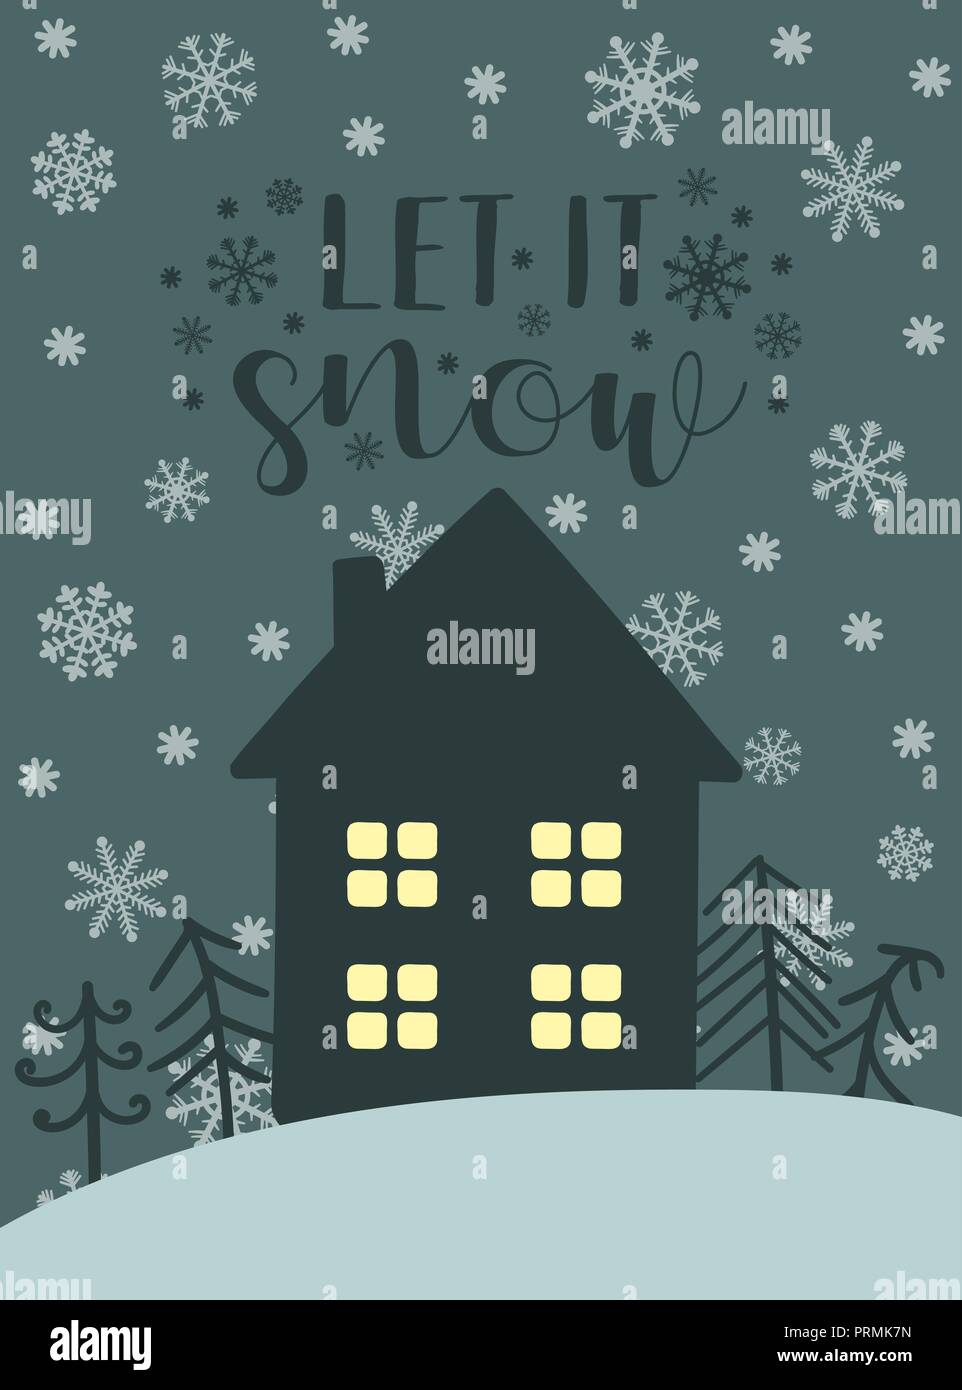 Vector illustration for new year. Hand-drawn image of a cartoon house with glowing windows on a background of the night sky with snowflakes. Inscripti Stock Vector